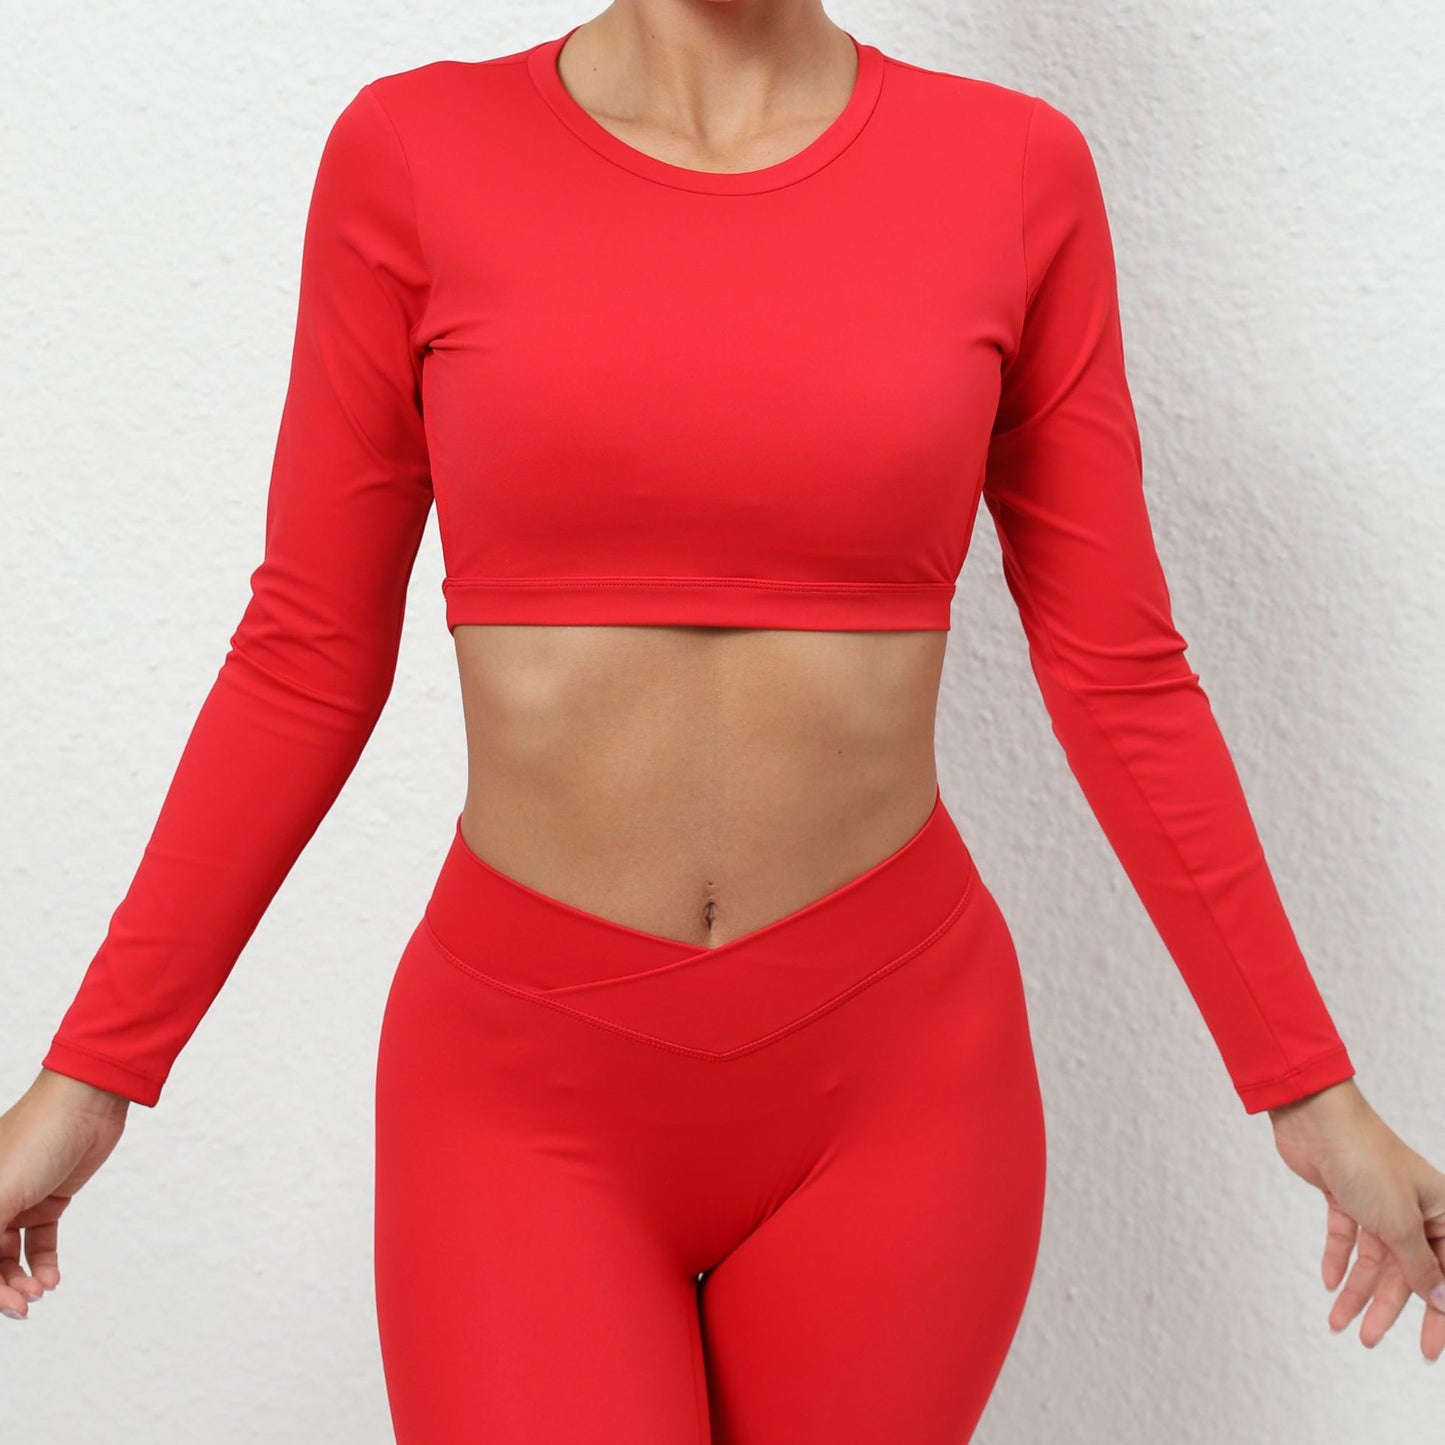 BamBam Women Backless Sports Running Quick-Drying Yoga Wear with Bra Pad Long Sleeve Top - BamBam